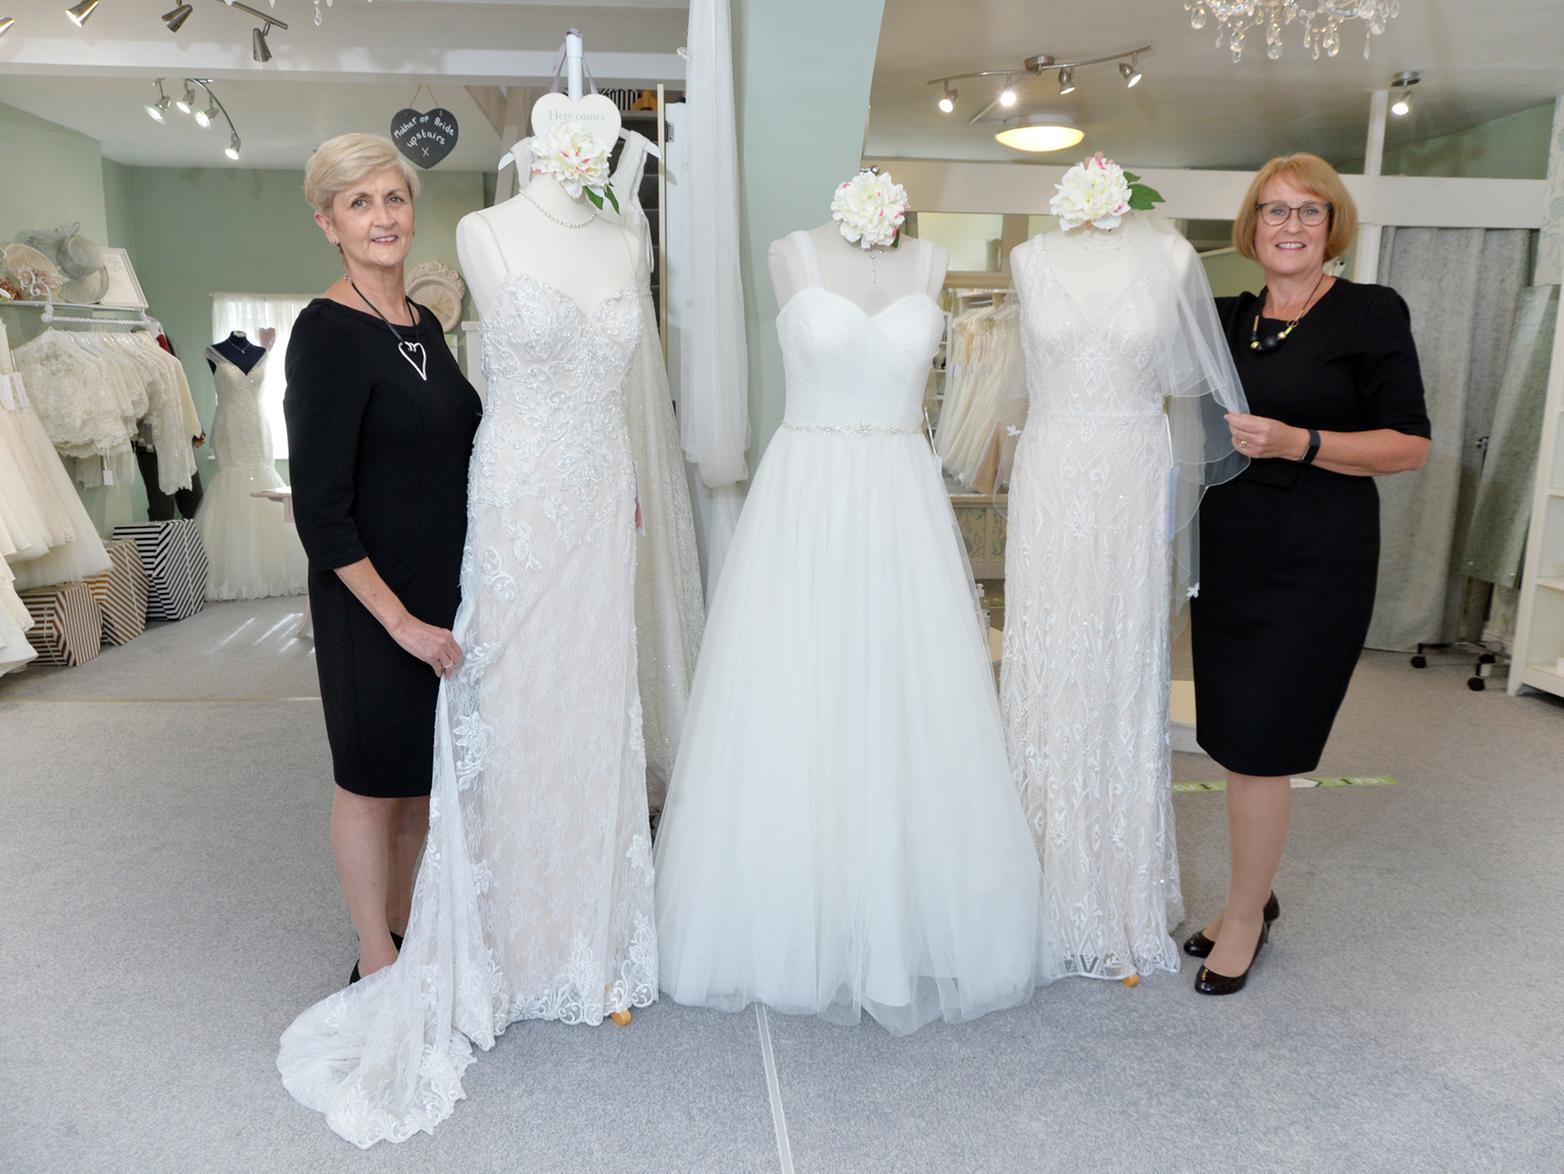 'I went to buy a wedding dress for my daughter in Kibworth